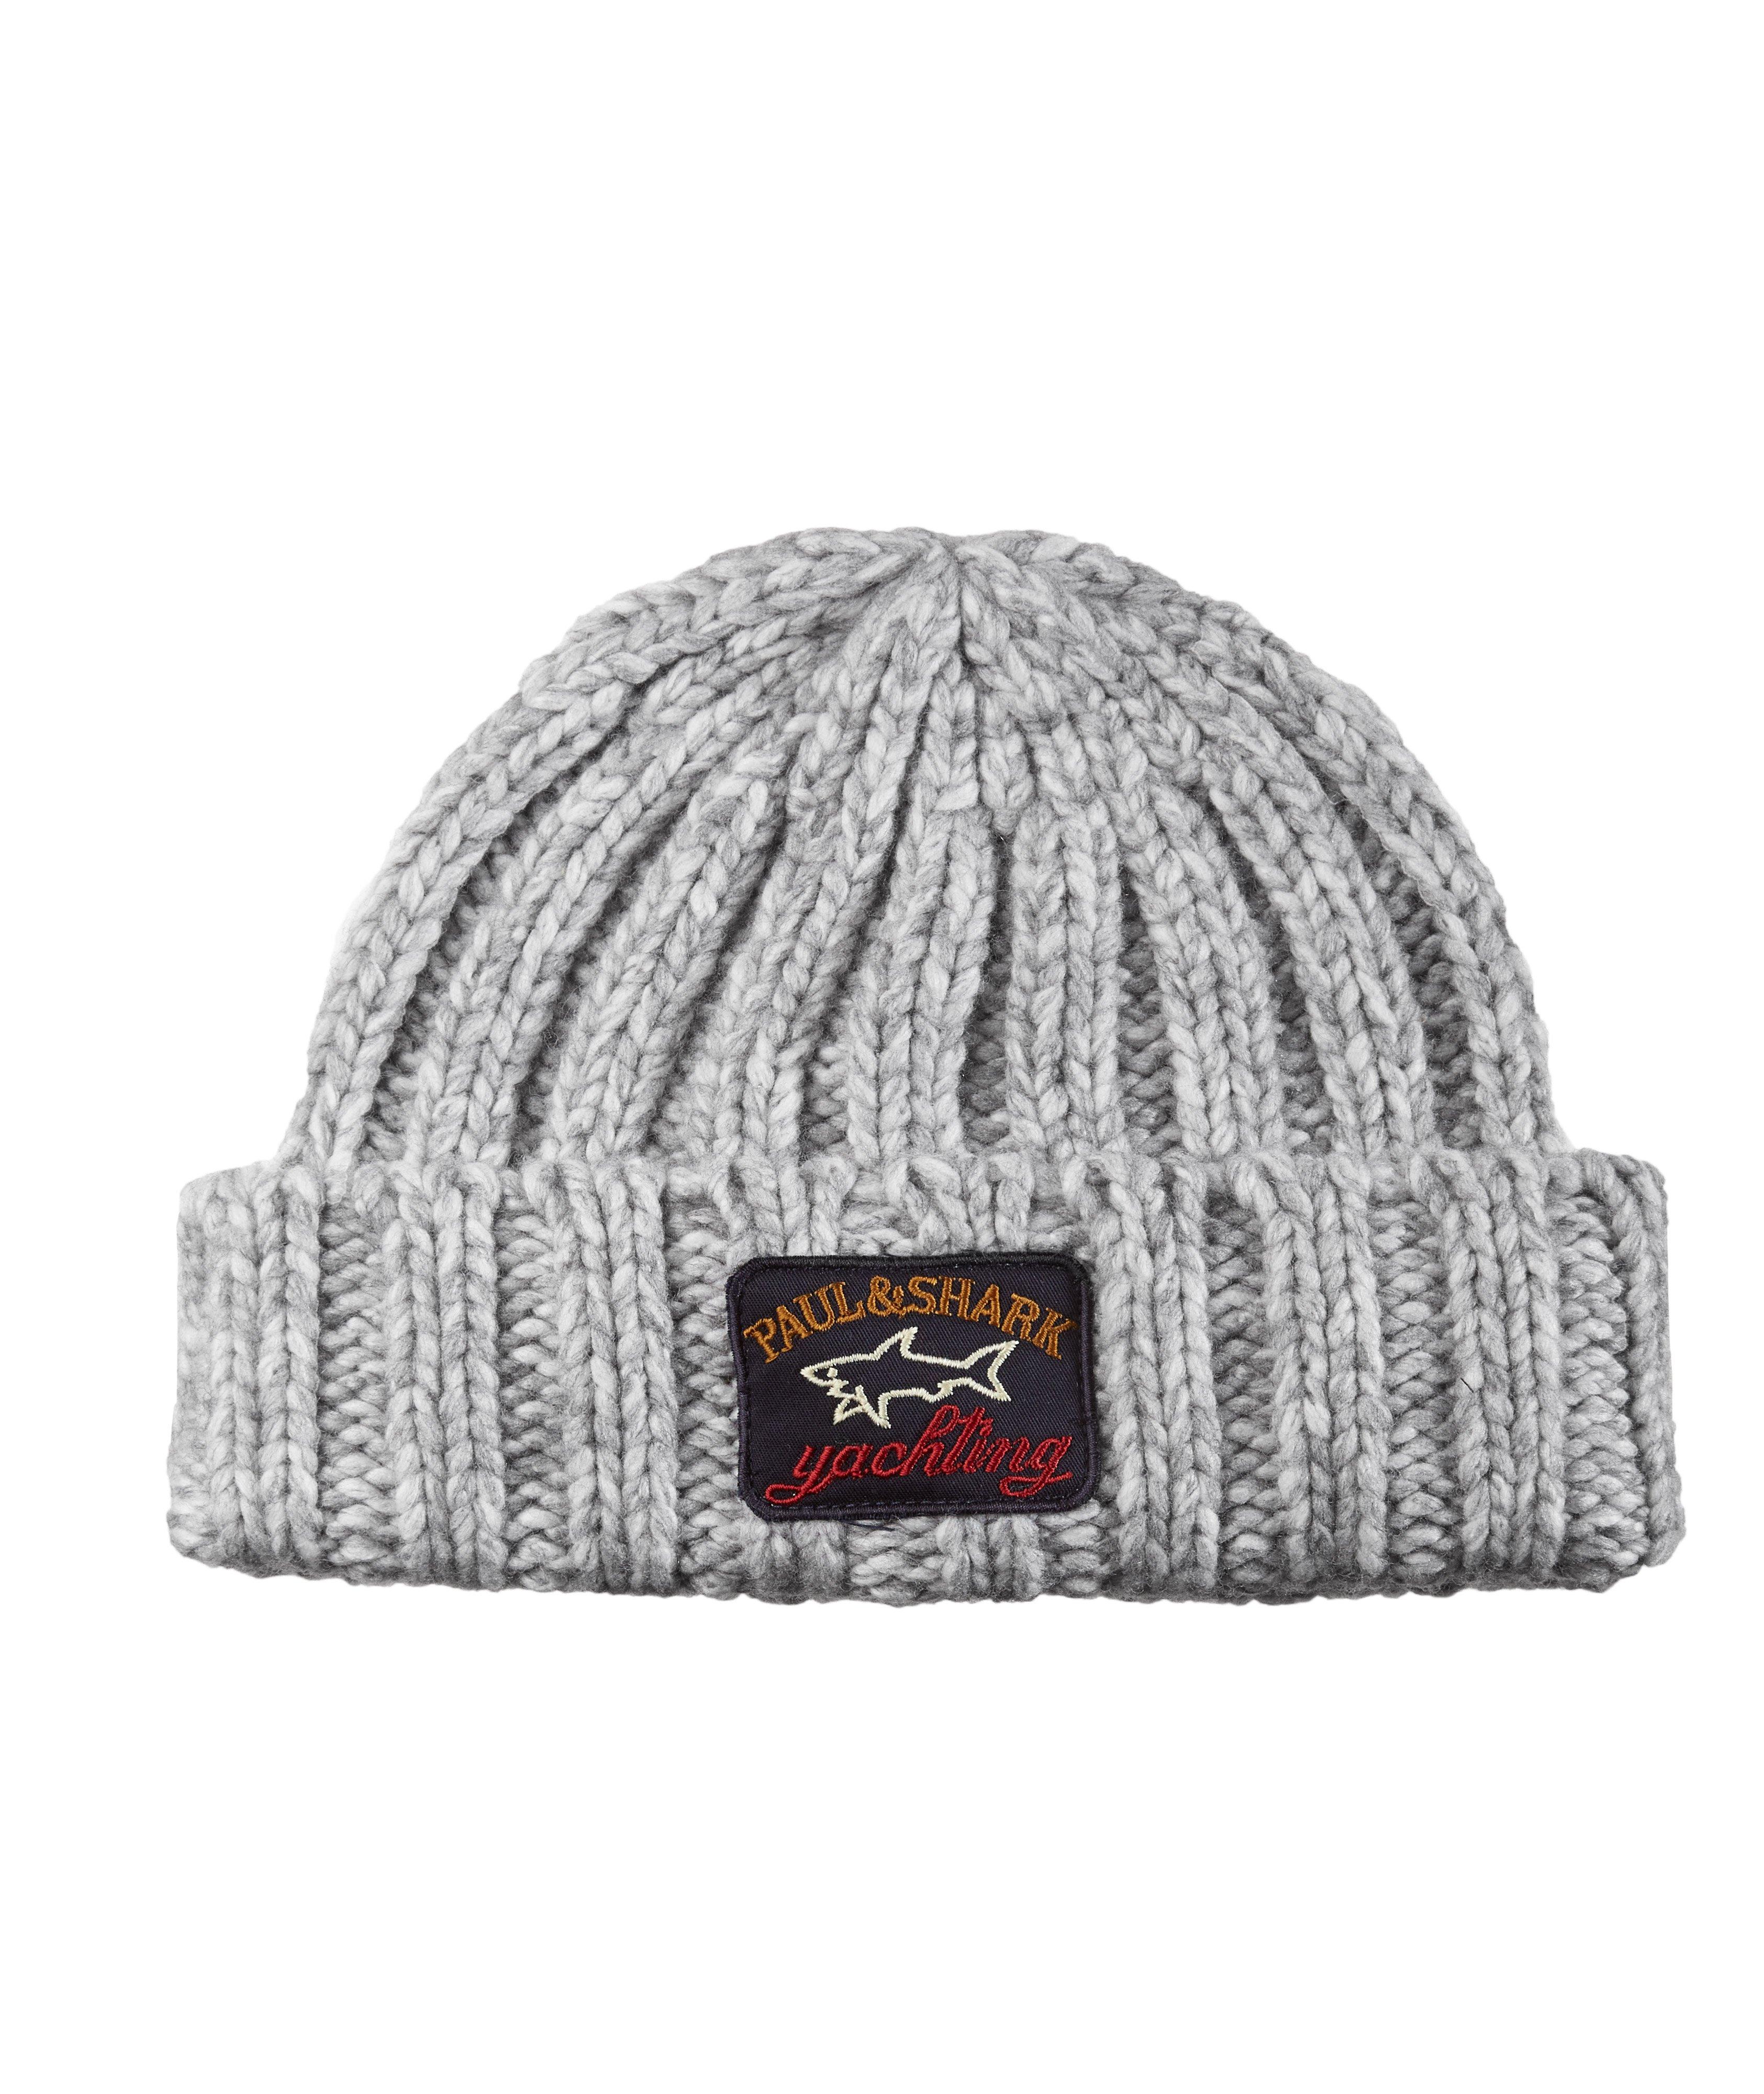 Ribbed Wool-Blend Toque image 0